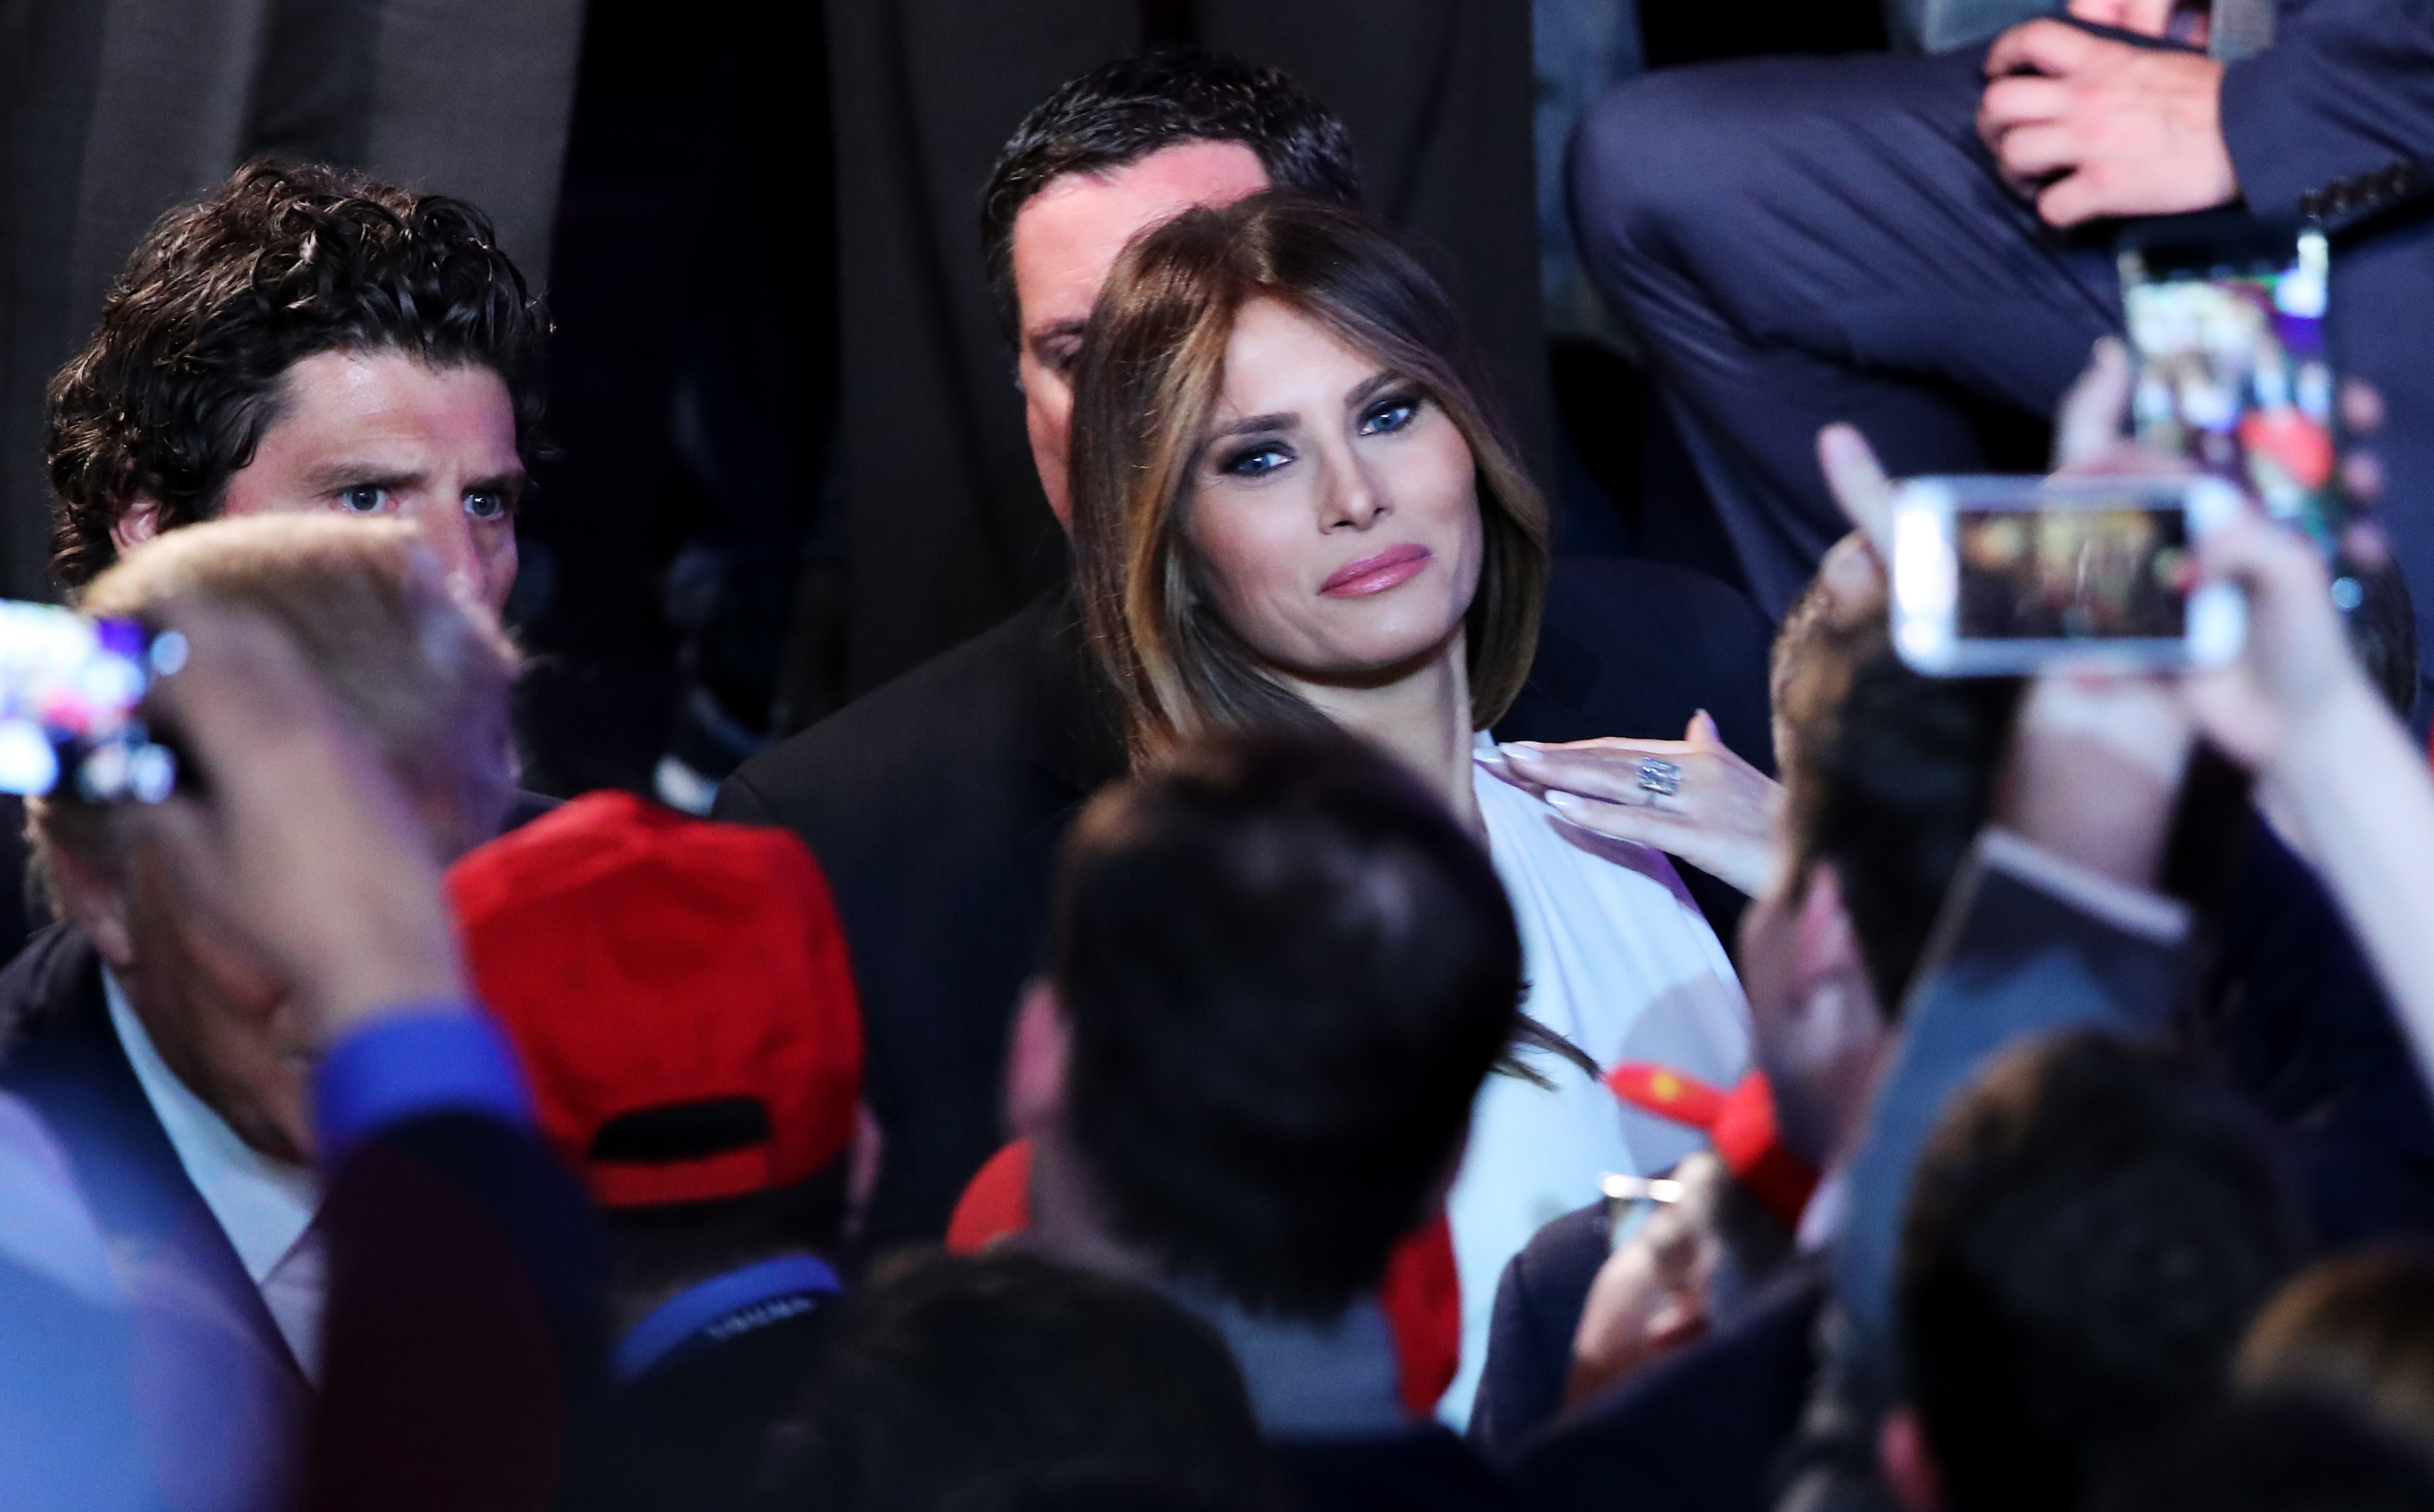 Melania Trump acknowledges people in the crowd after her husband and Republican president-elect Donald Trump delivered his acceptance speech at the New York Hilton Midtown in the early morning hours of November 9, 2016 in New York City. (Mark Wilson&mdash;Getty Images)